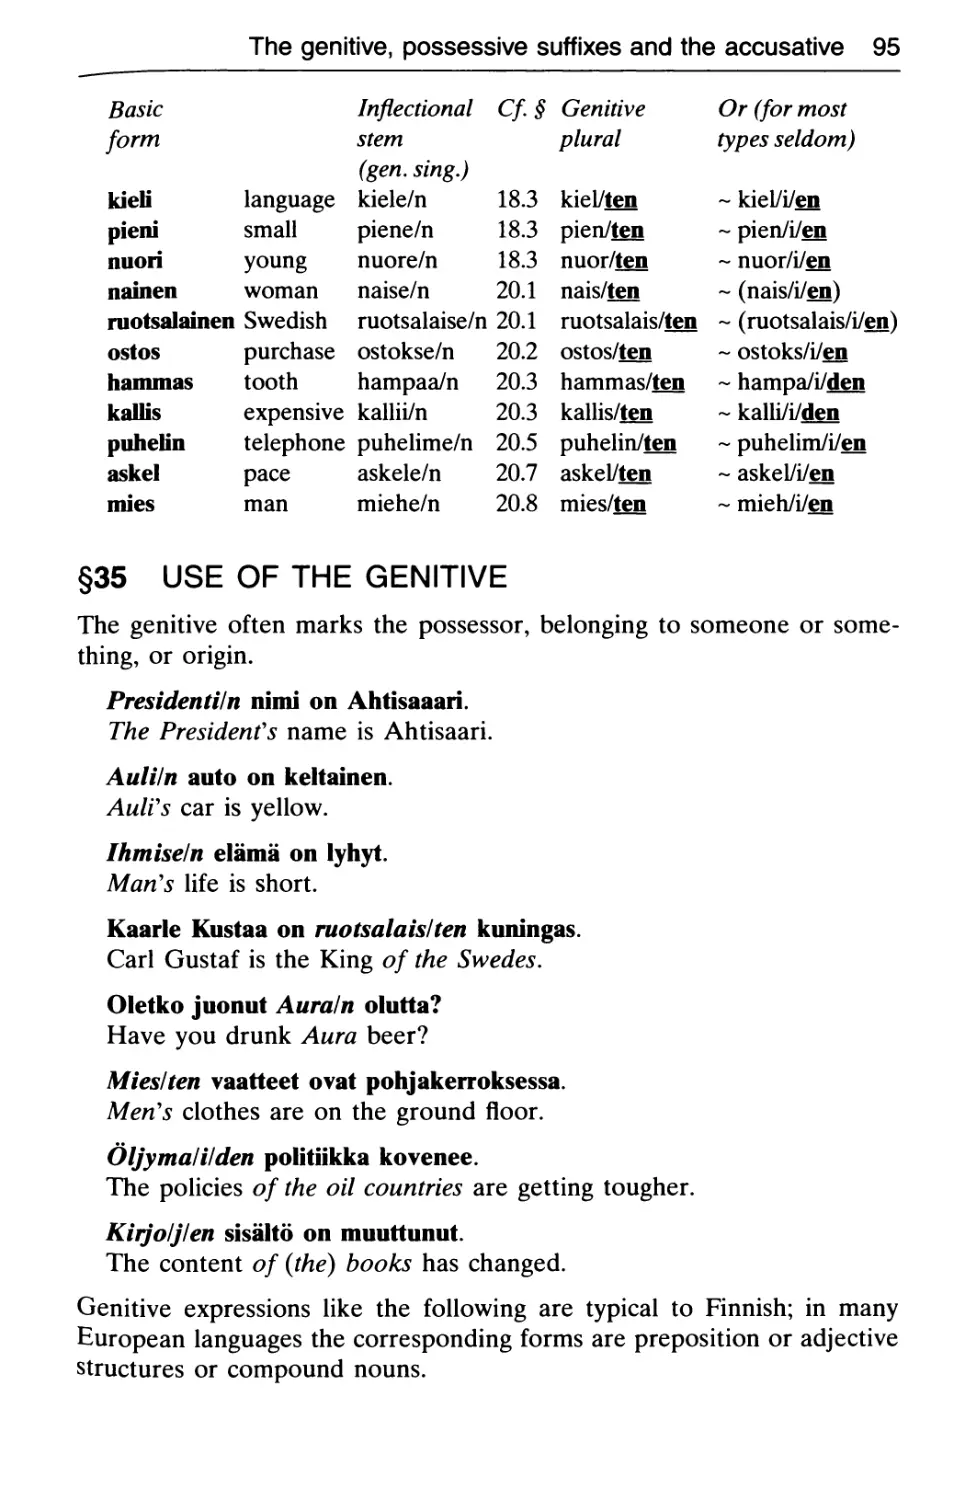 §35 Use of the genitive